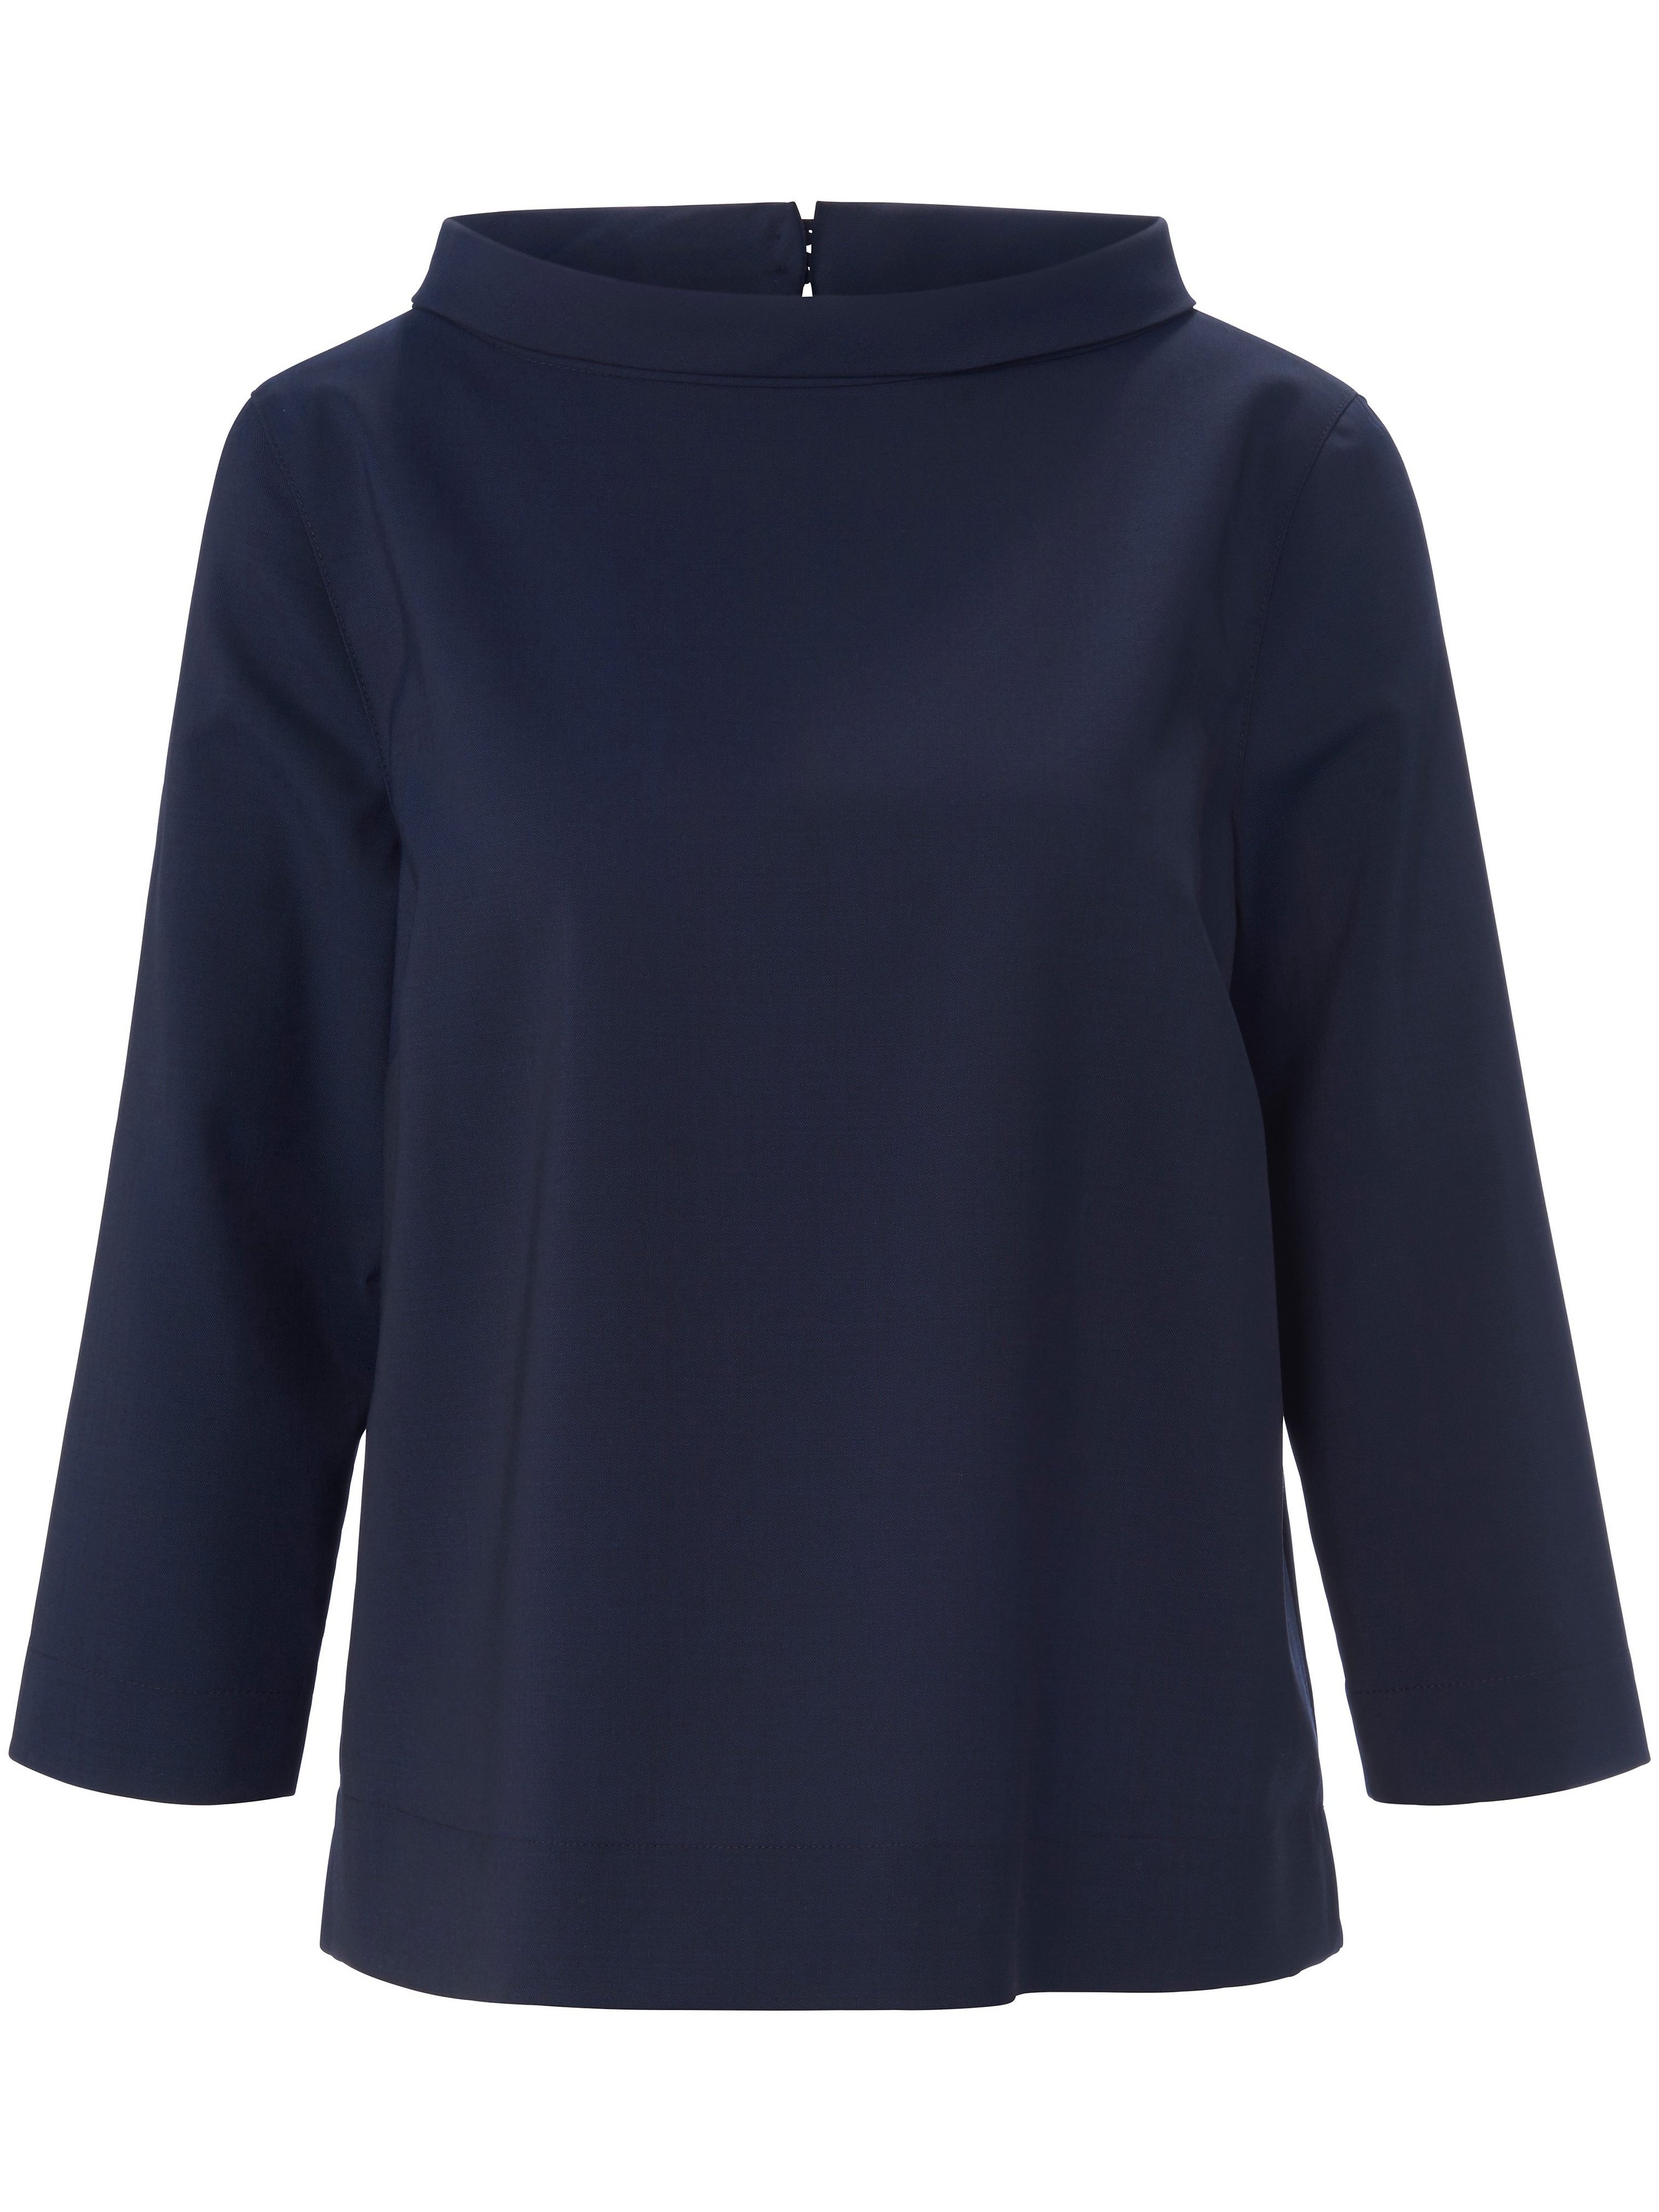 Le top manches 3/4  Windsor bleu taille 36